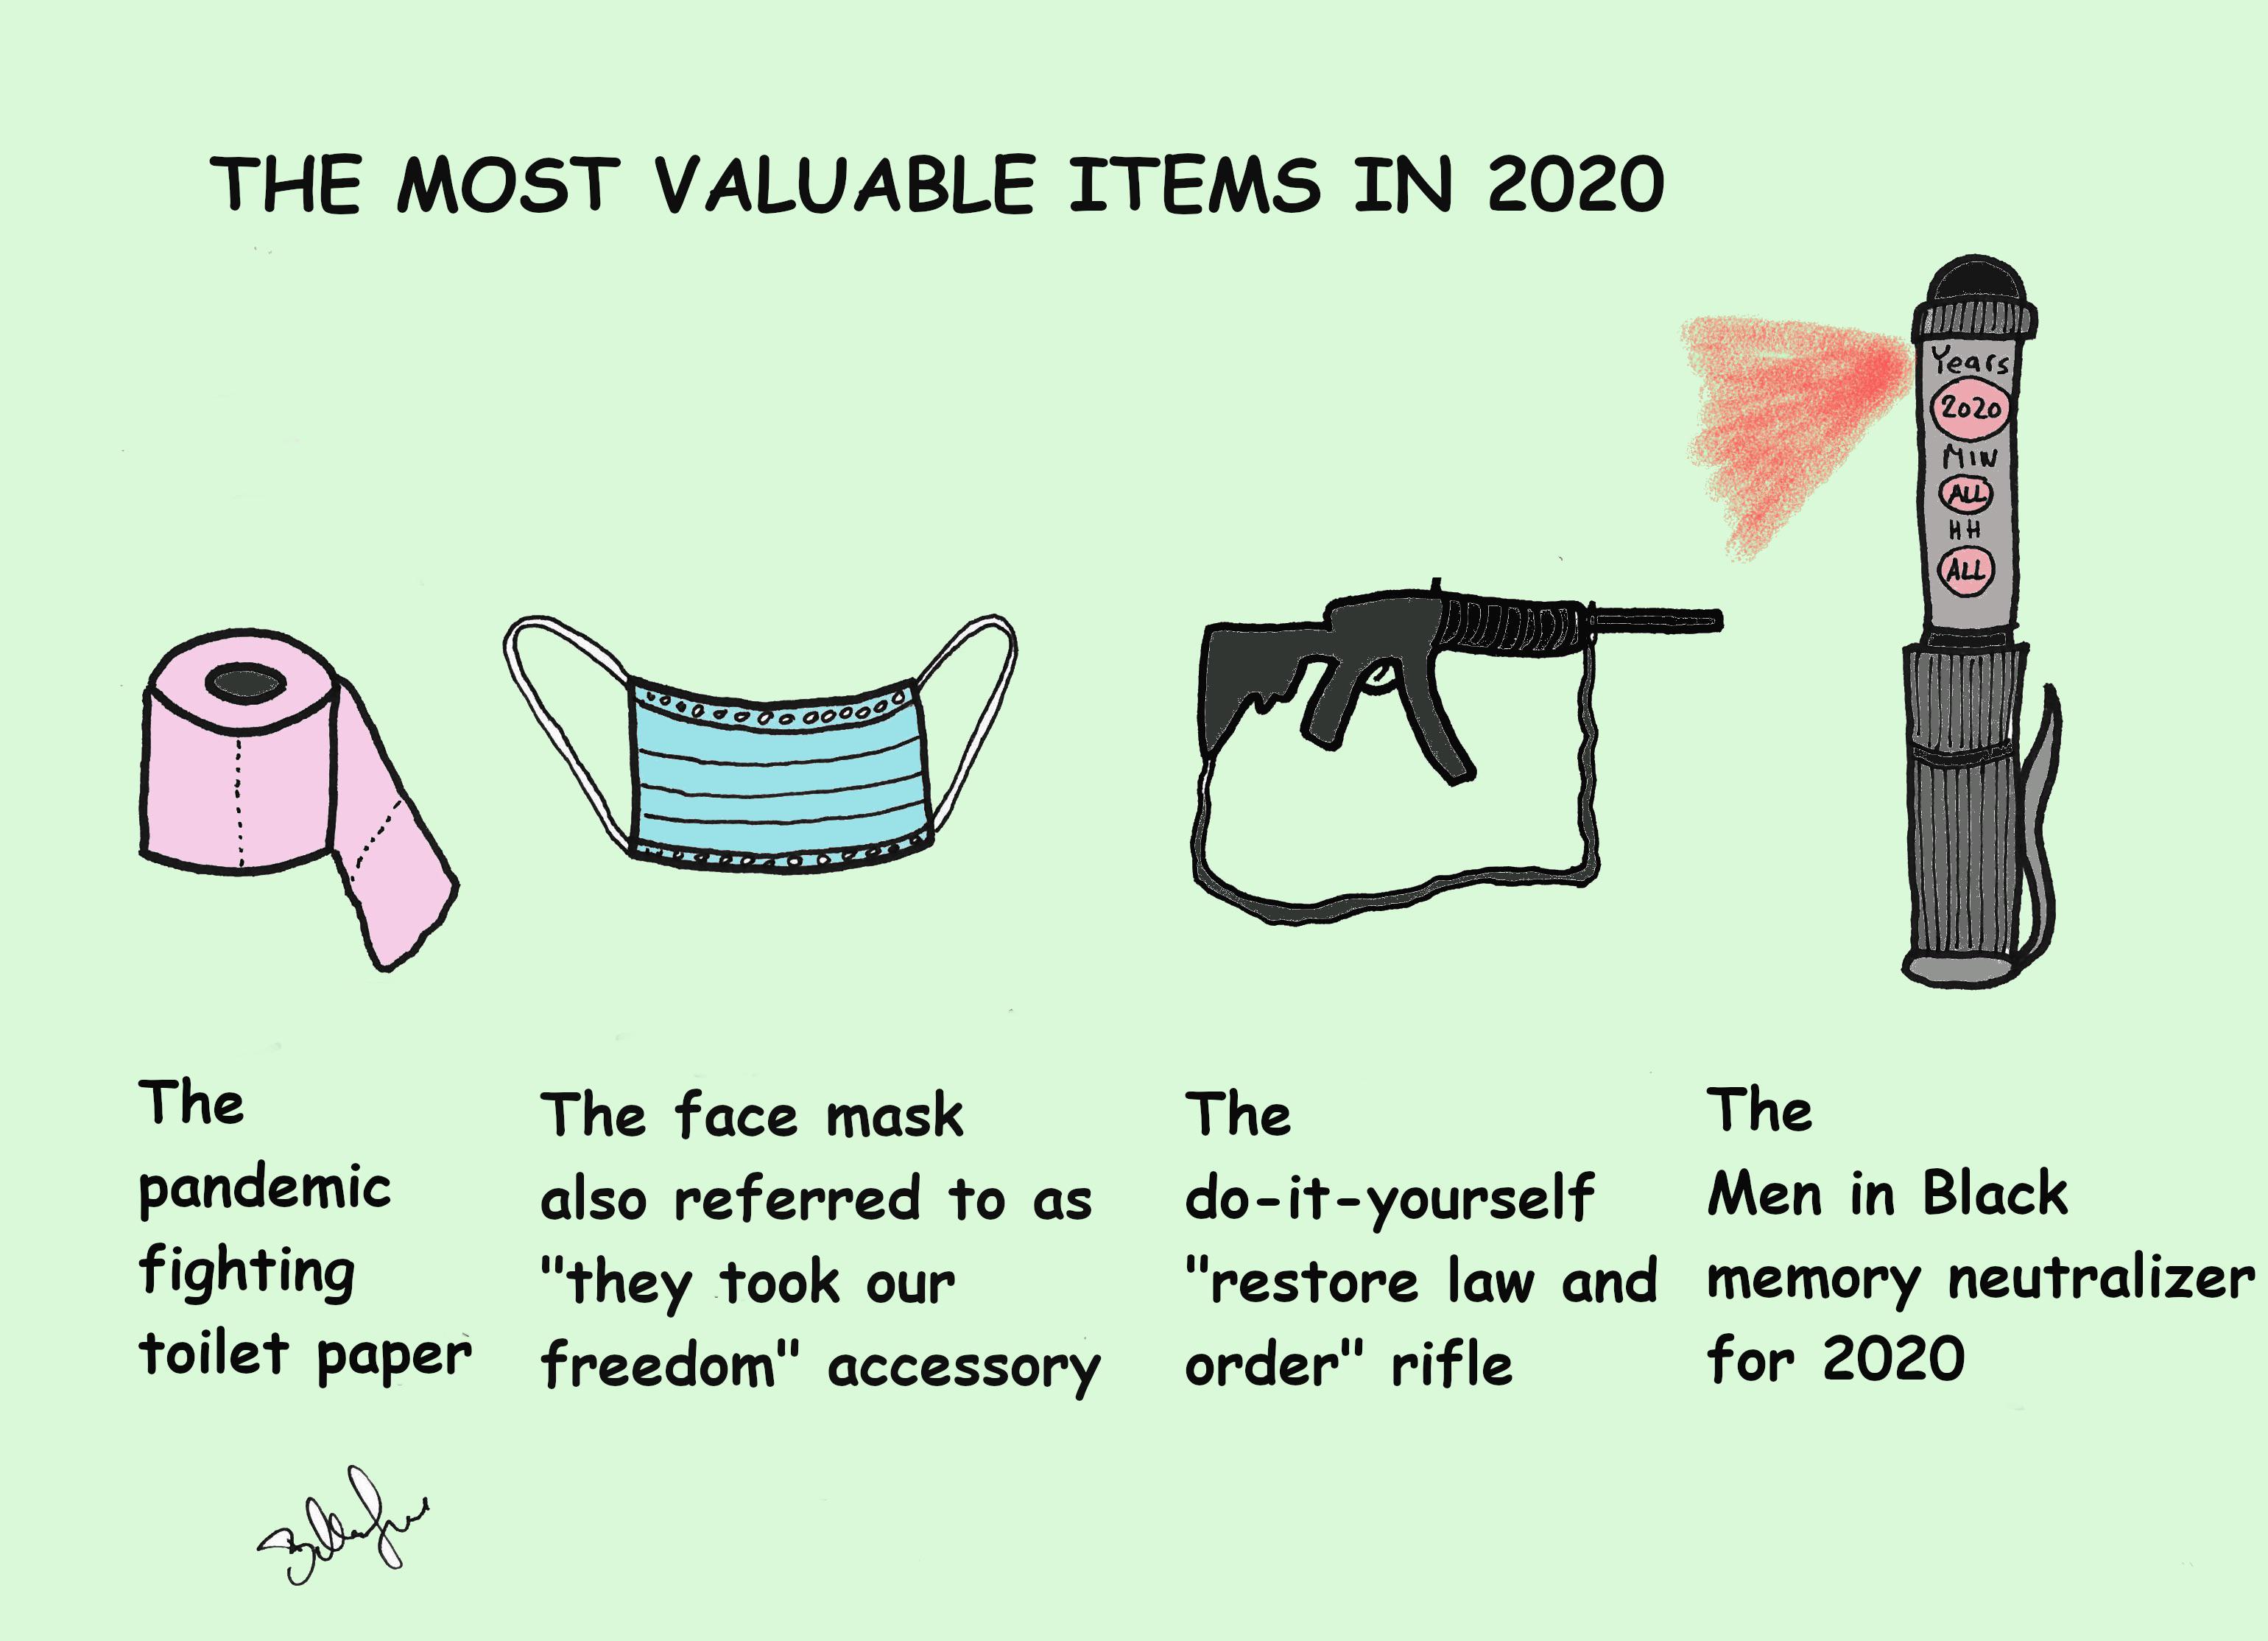 The most valuable items of 2020